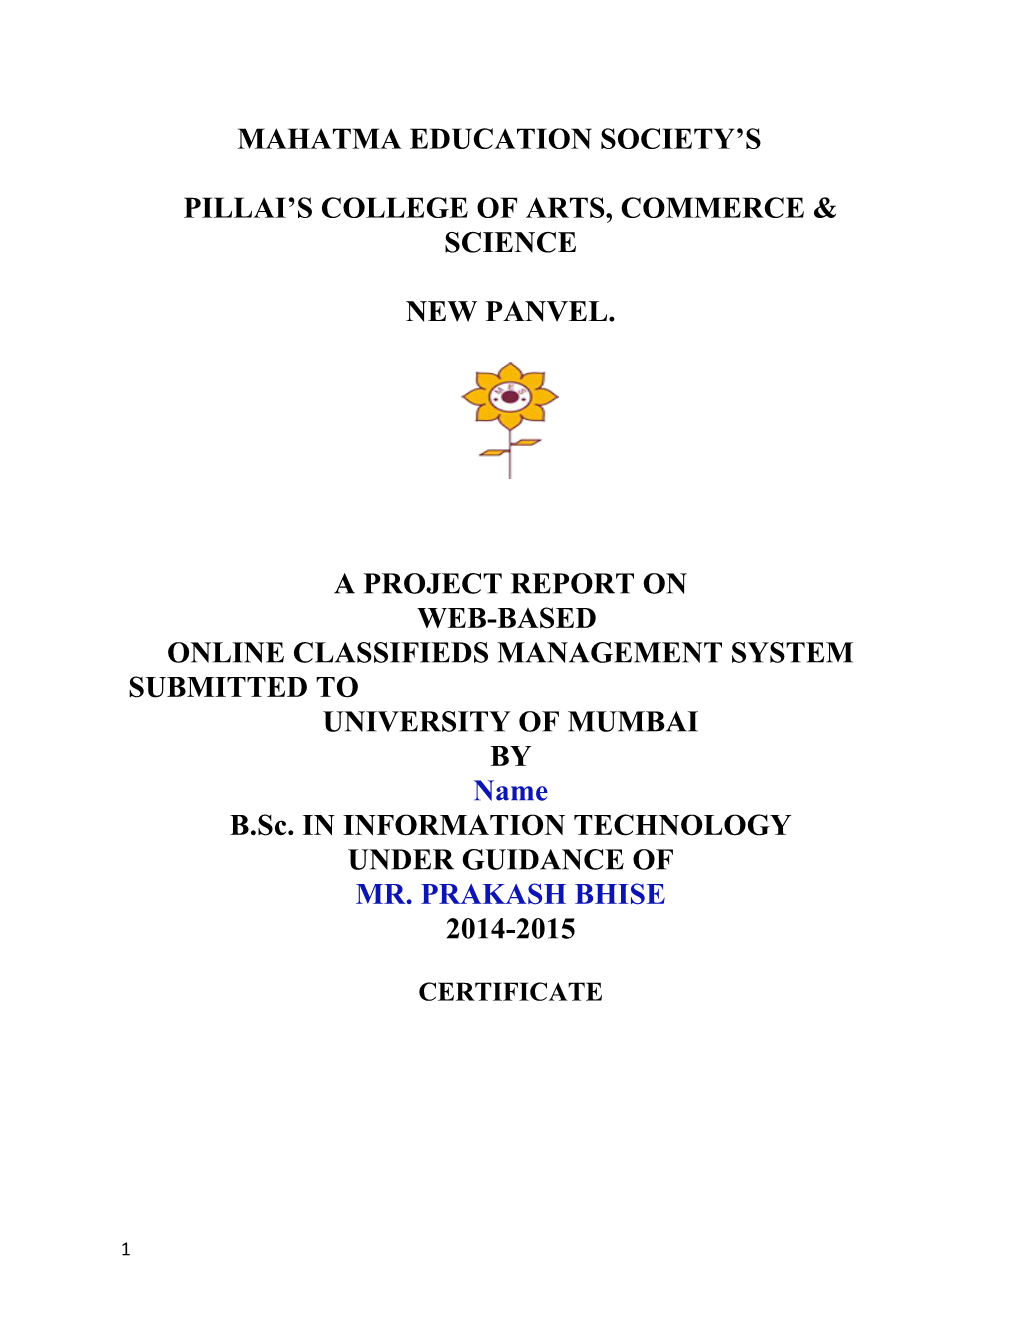 Pillai S College of Arts, Commerce & Science